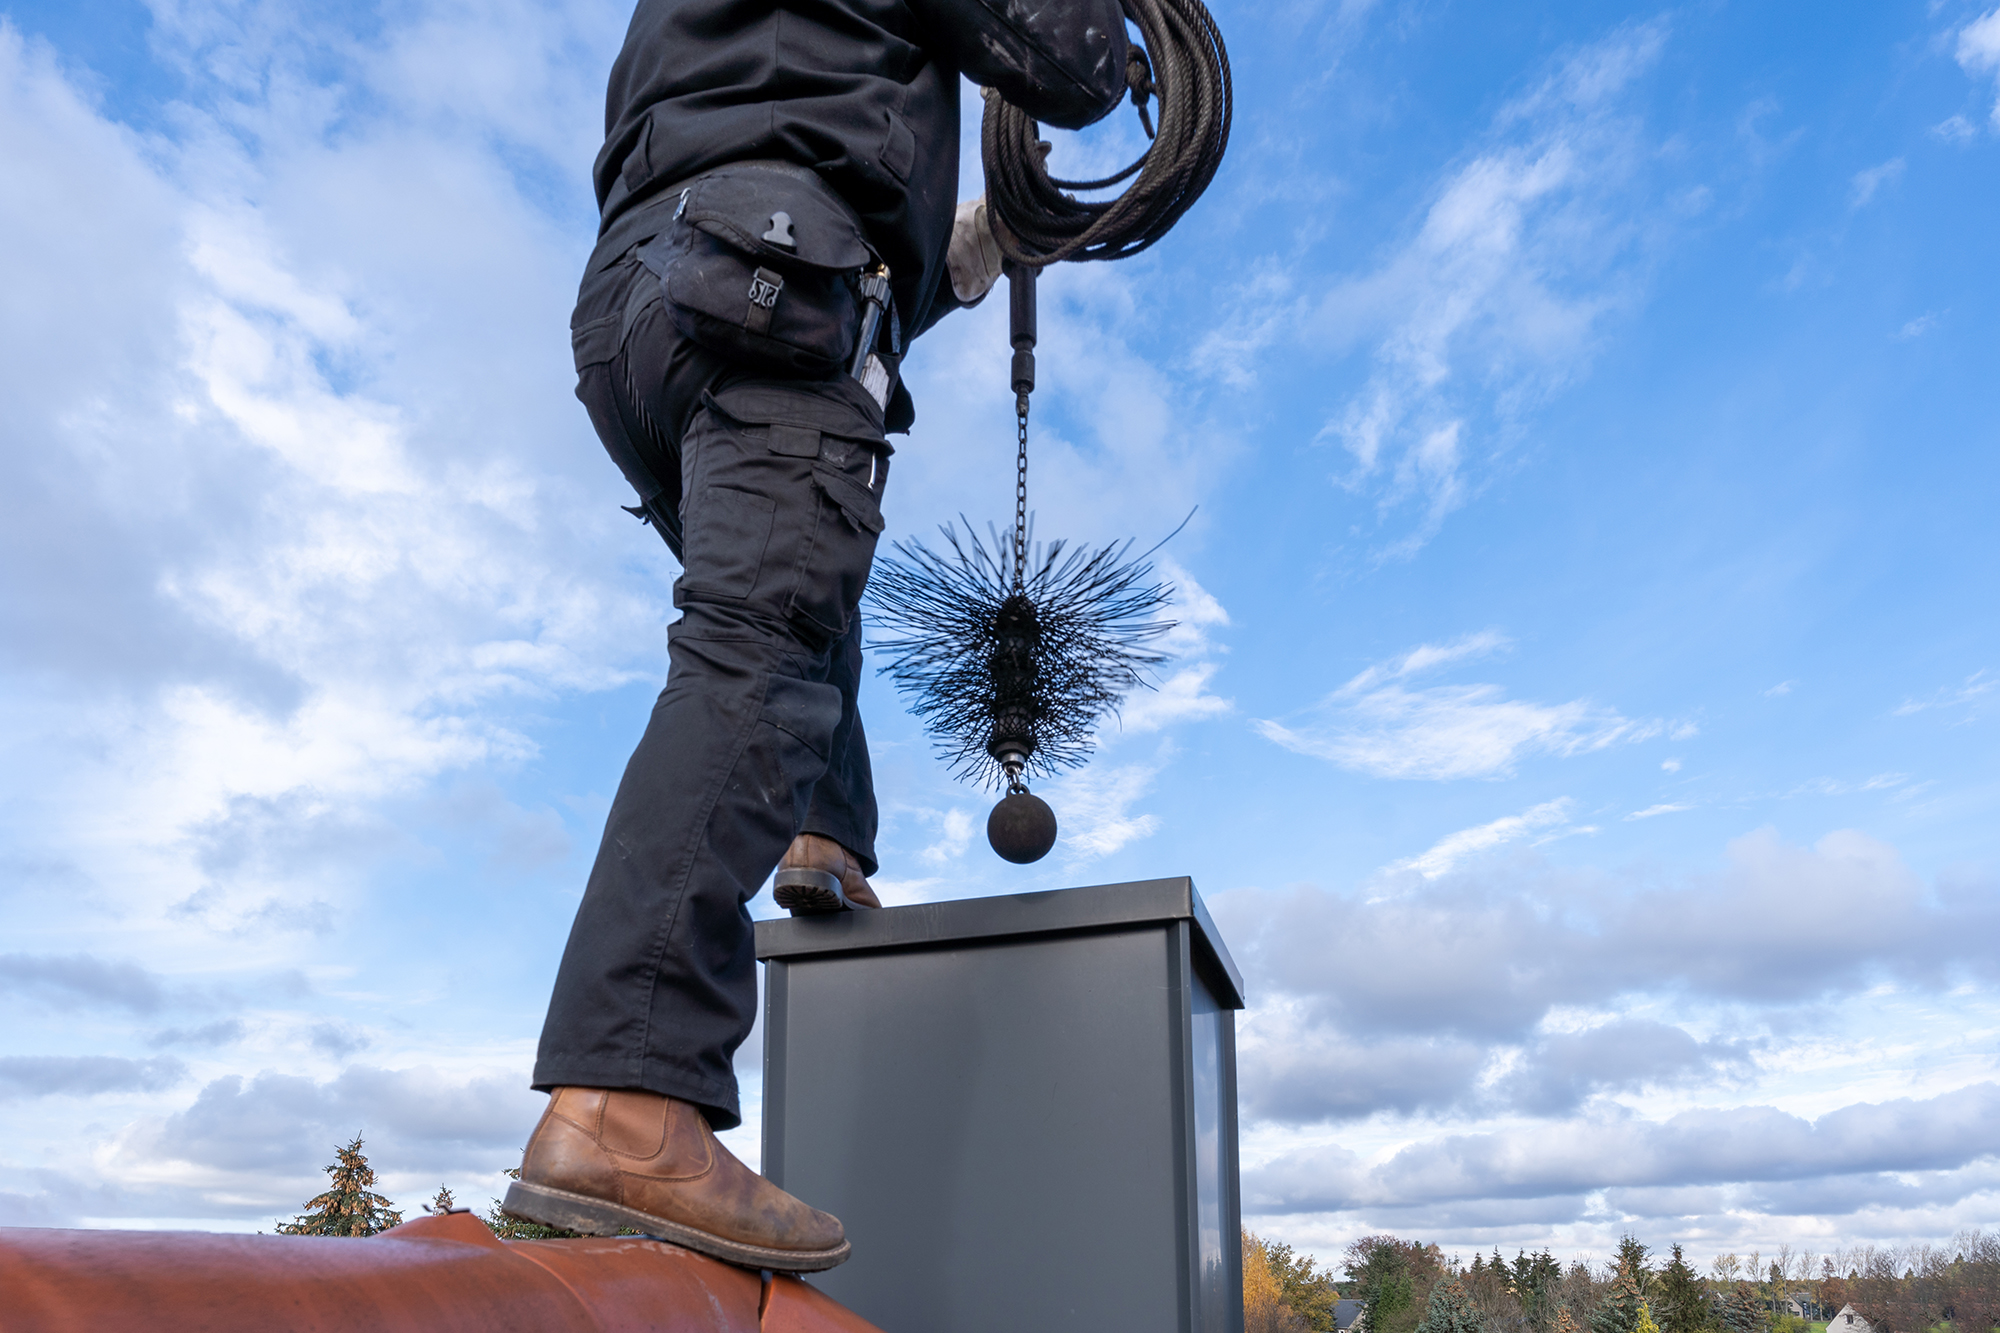 Example application other media: Chimney sweep